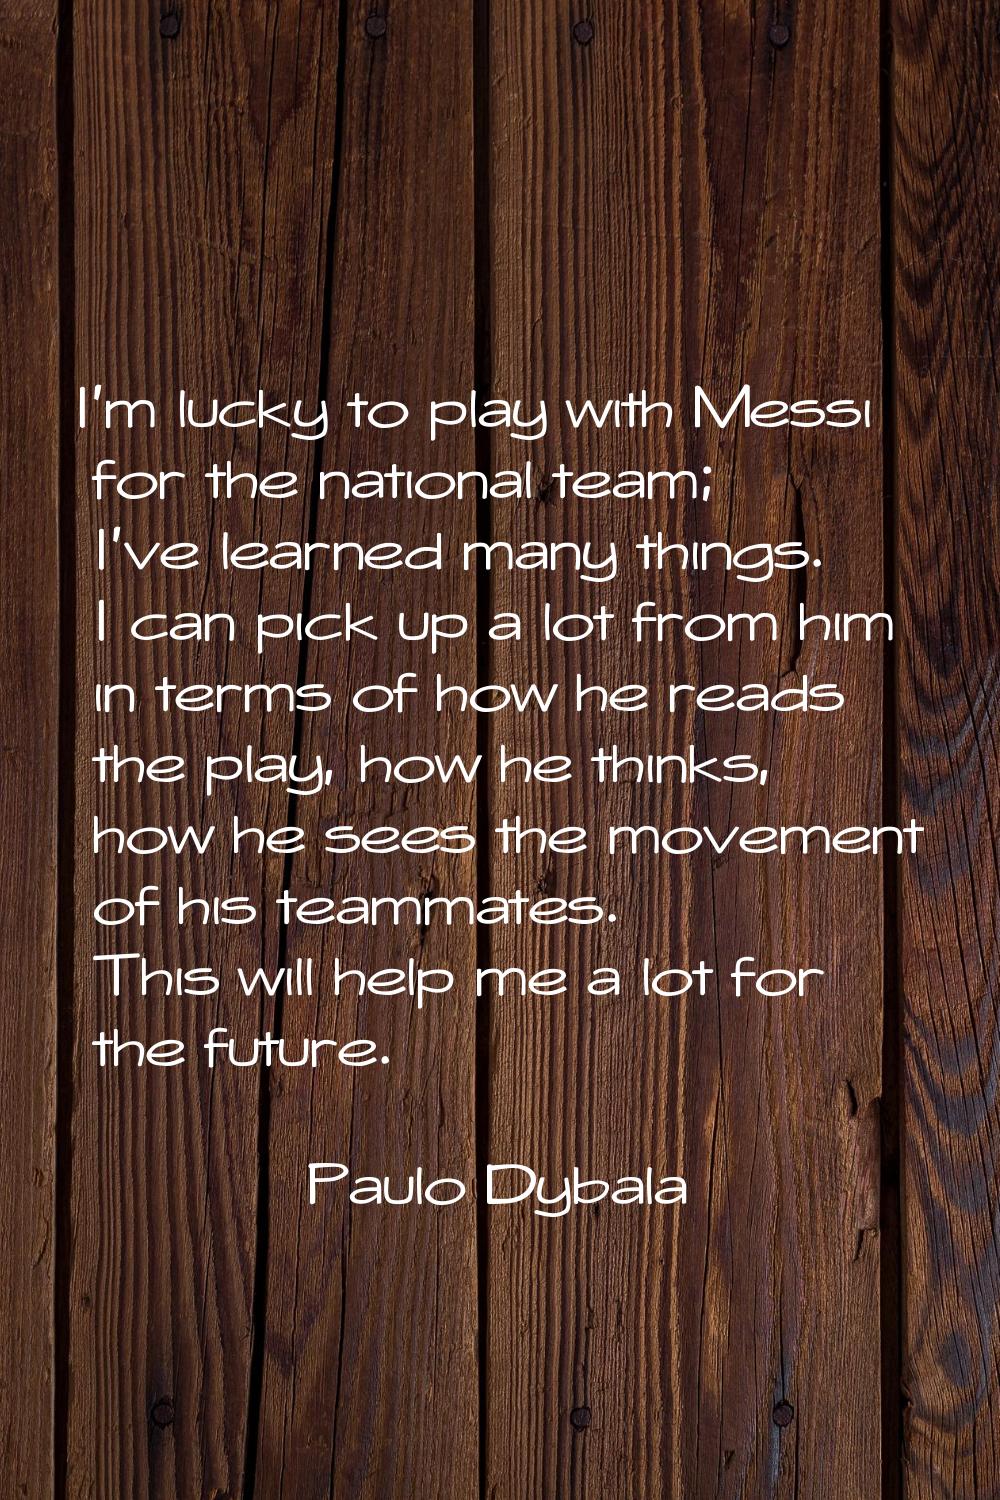 I'm lucky to play with Messi for the national team; I've learned many things. I can pick up a lot f